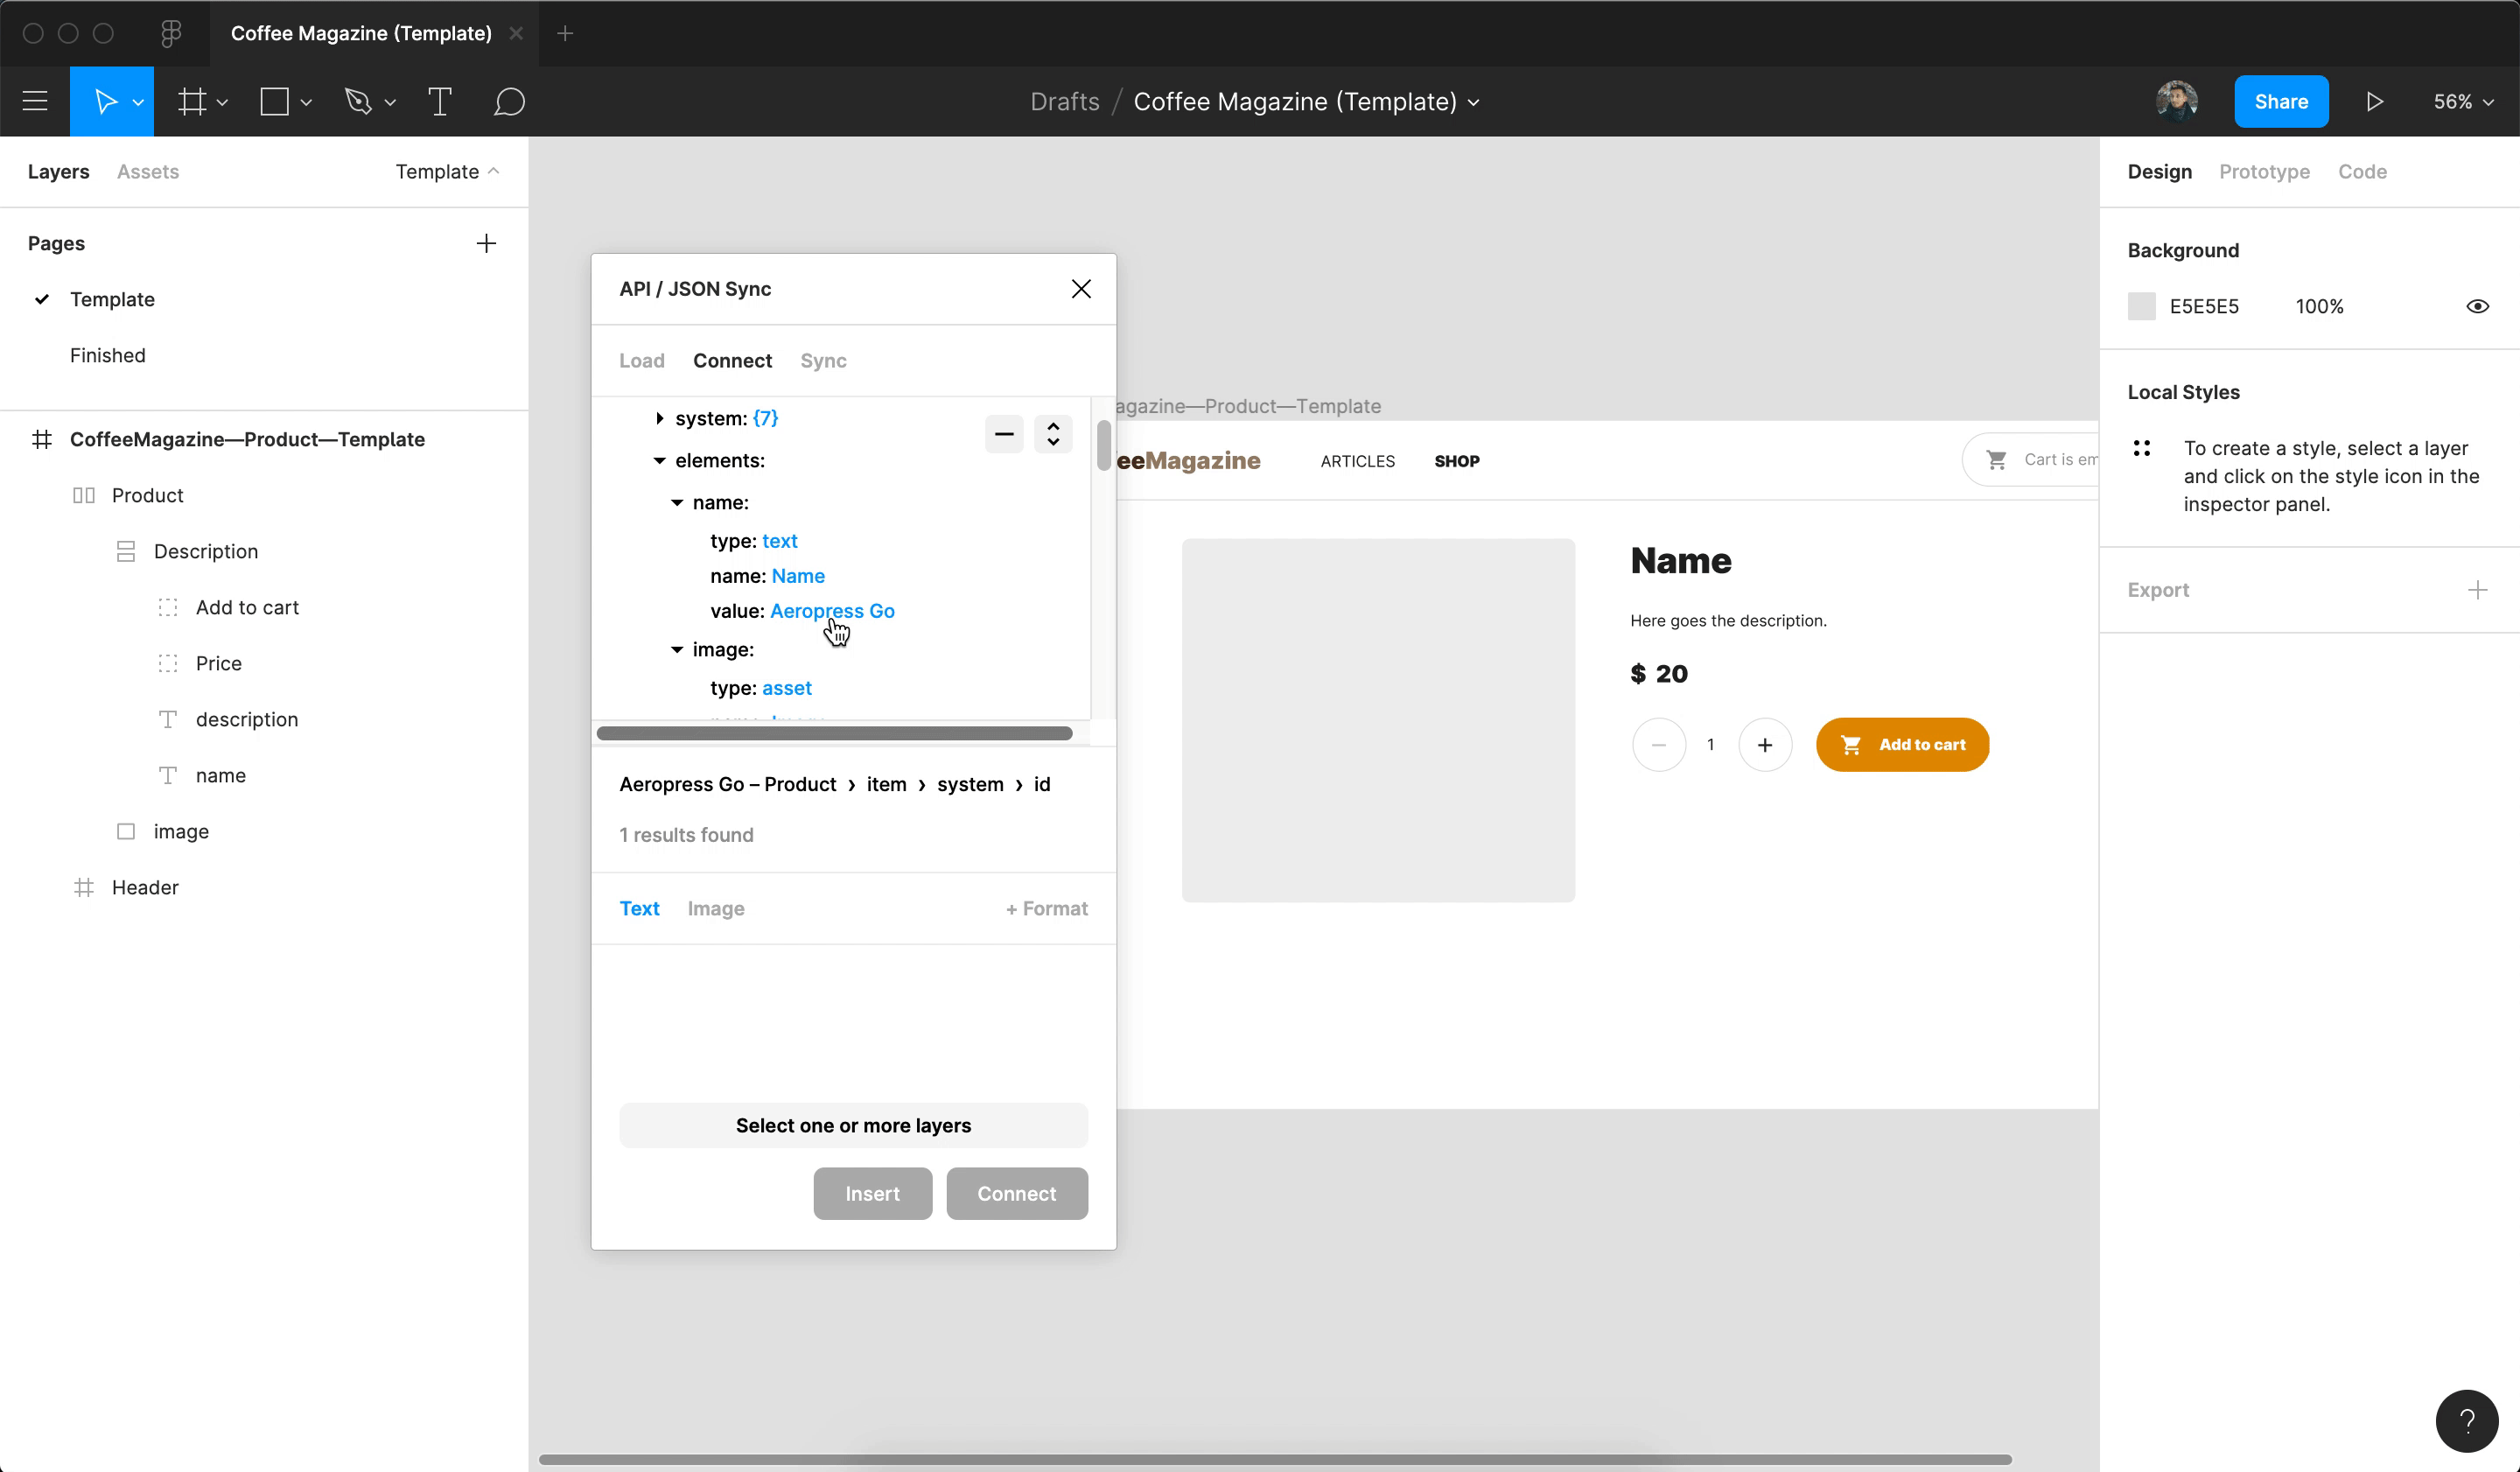 Connecting the content with elements in Figma using the API / JSON plugin.